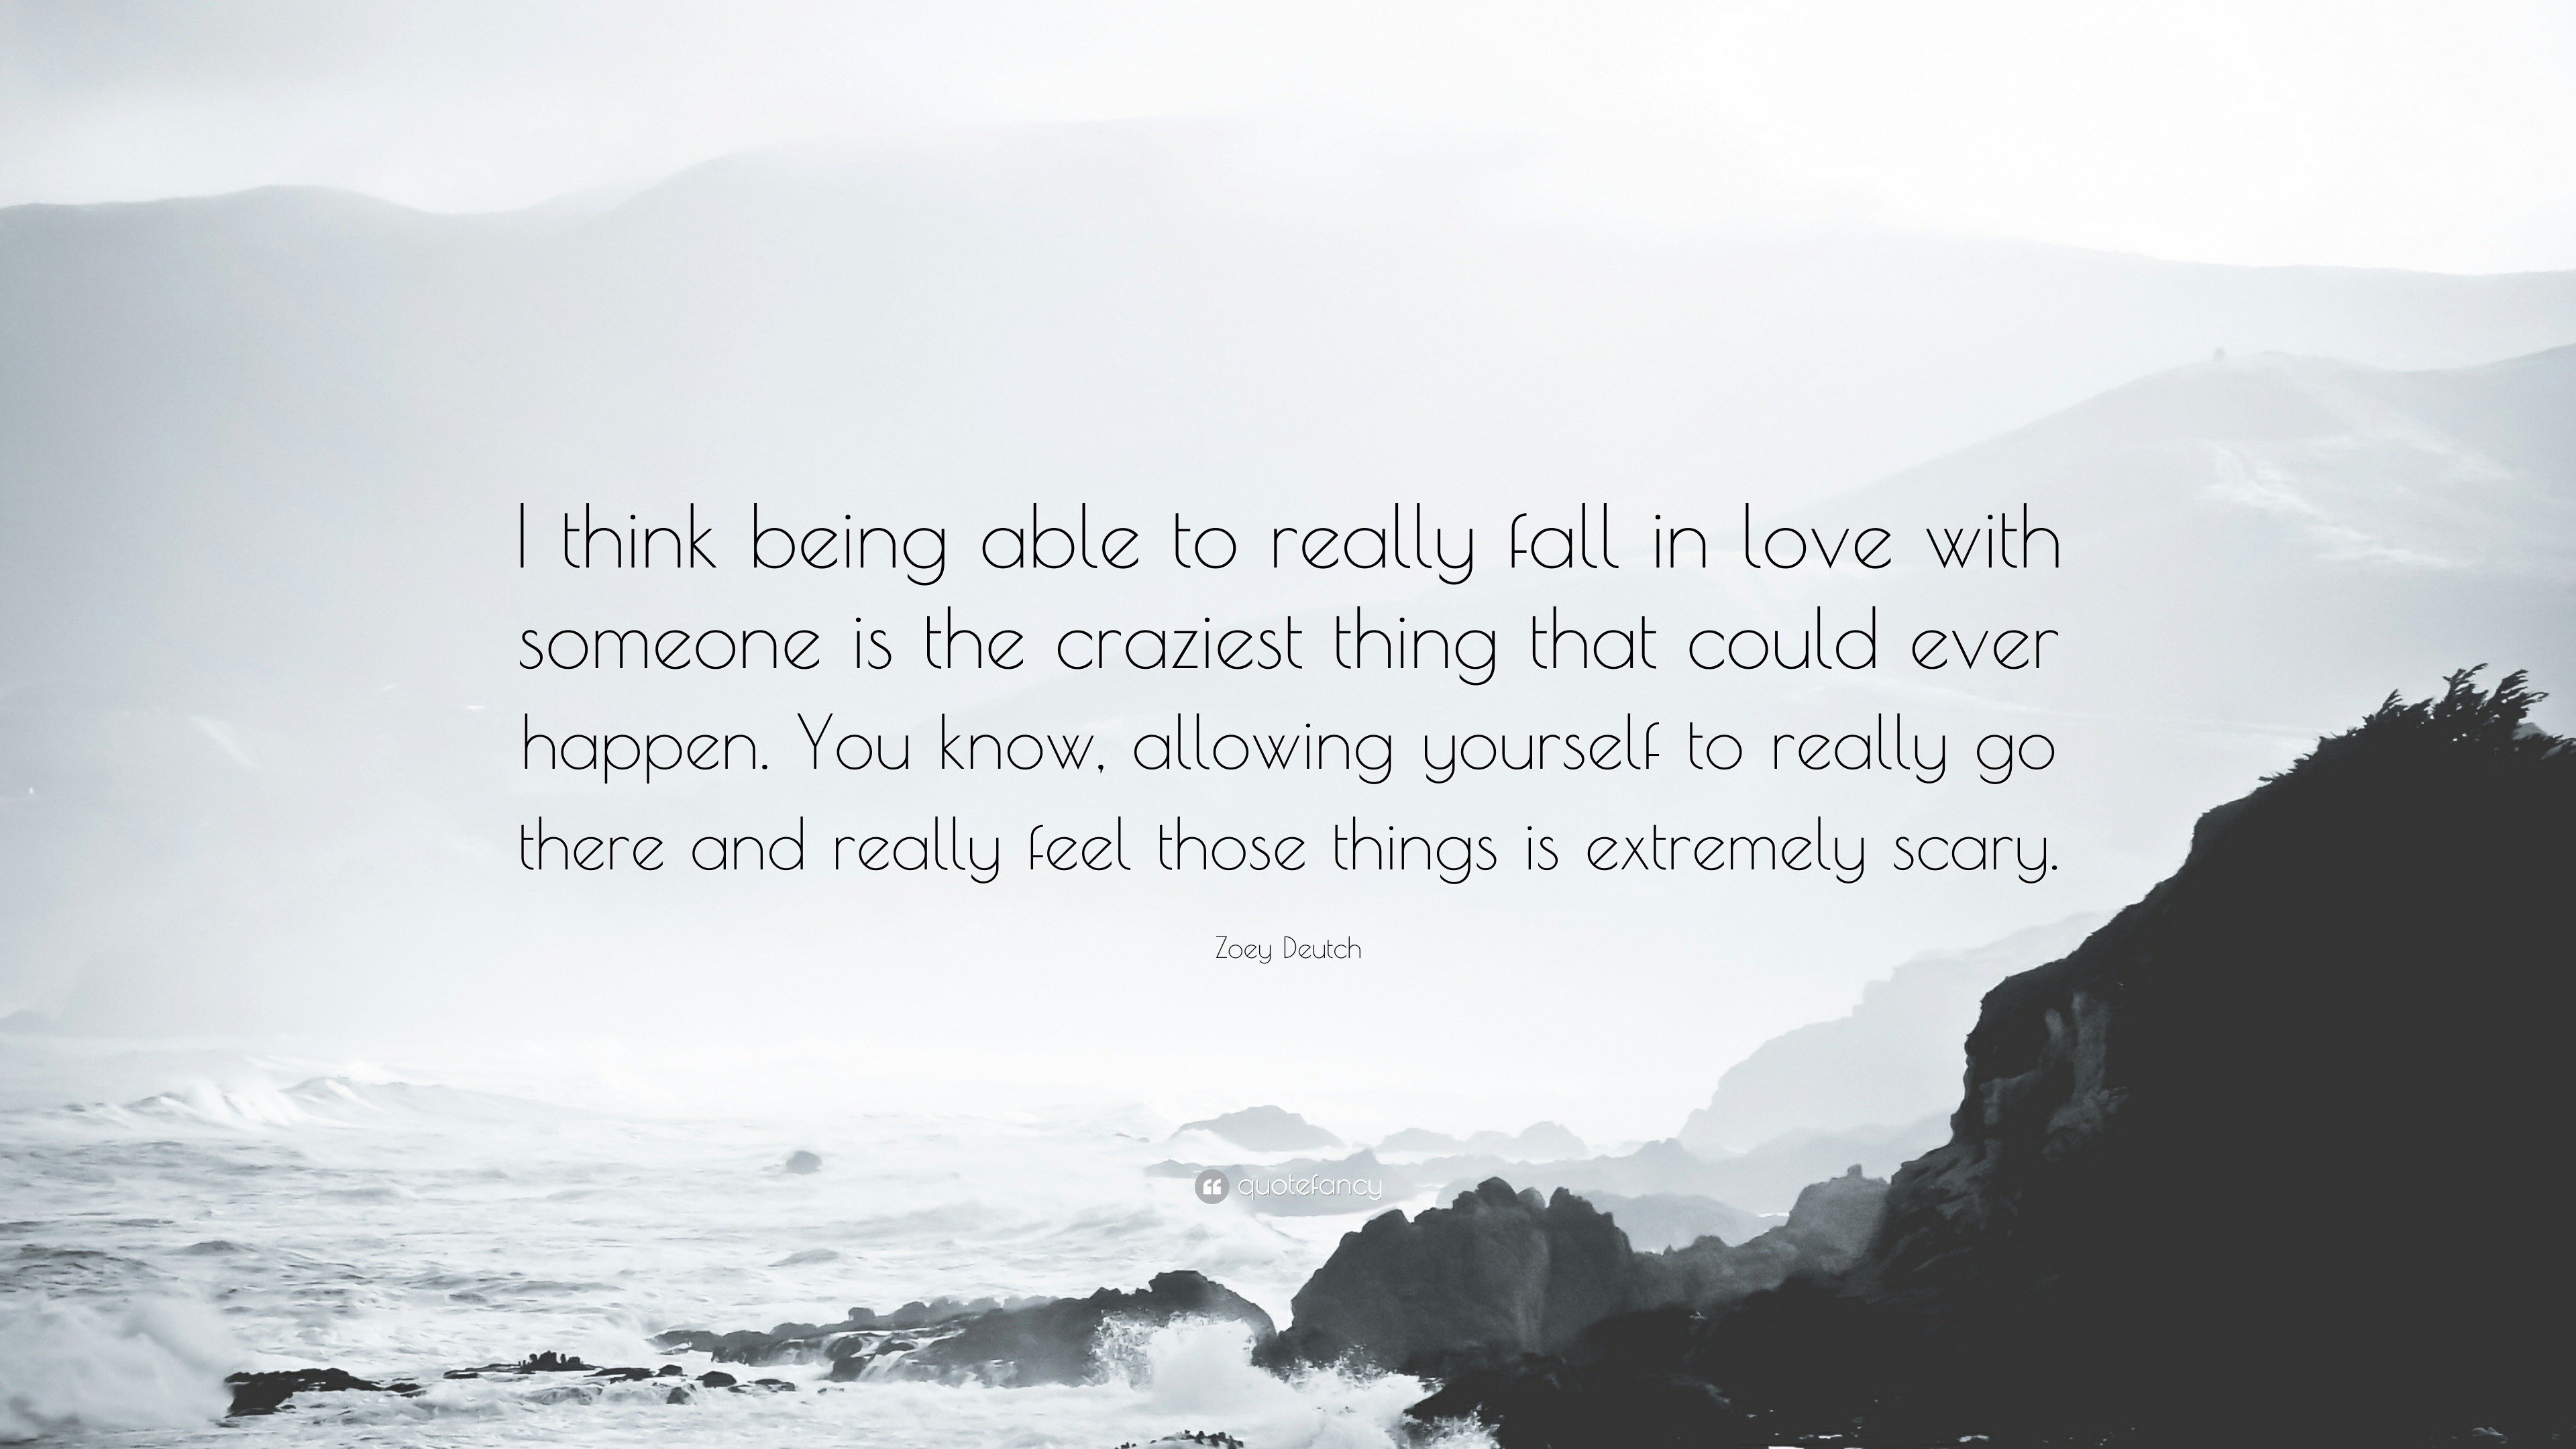 Zoey Deutch Quote “I think being able to really fall in love with someone